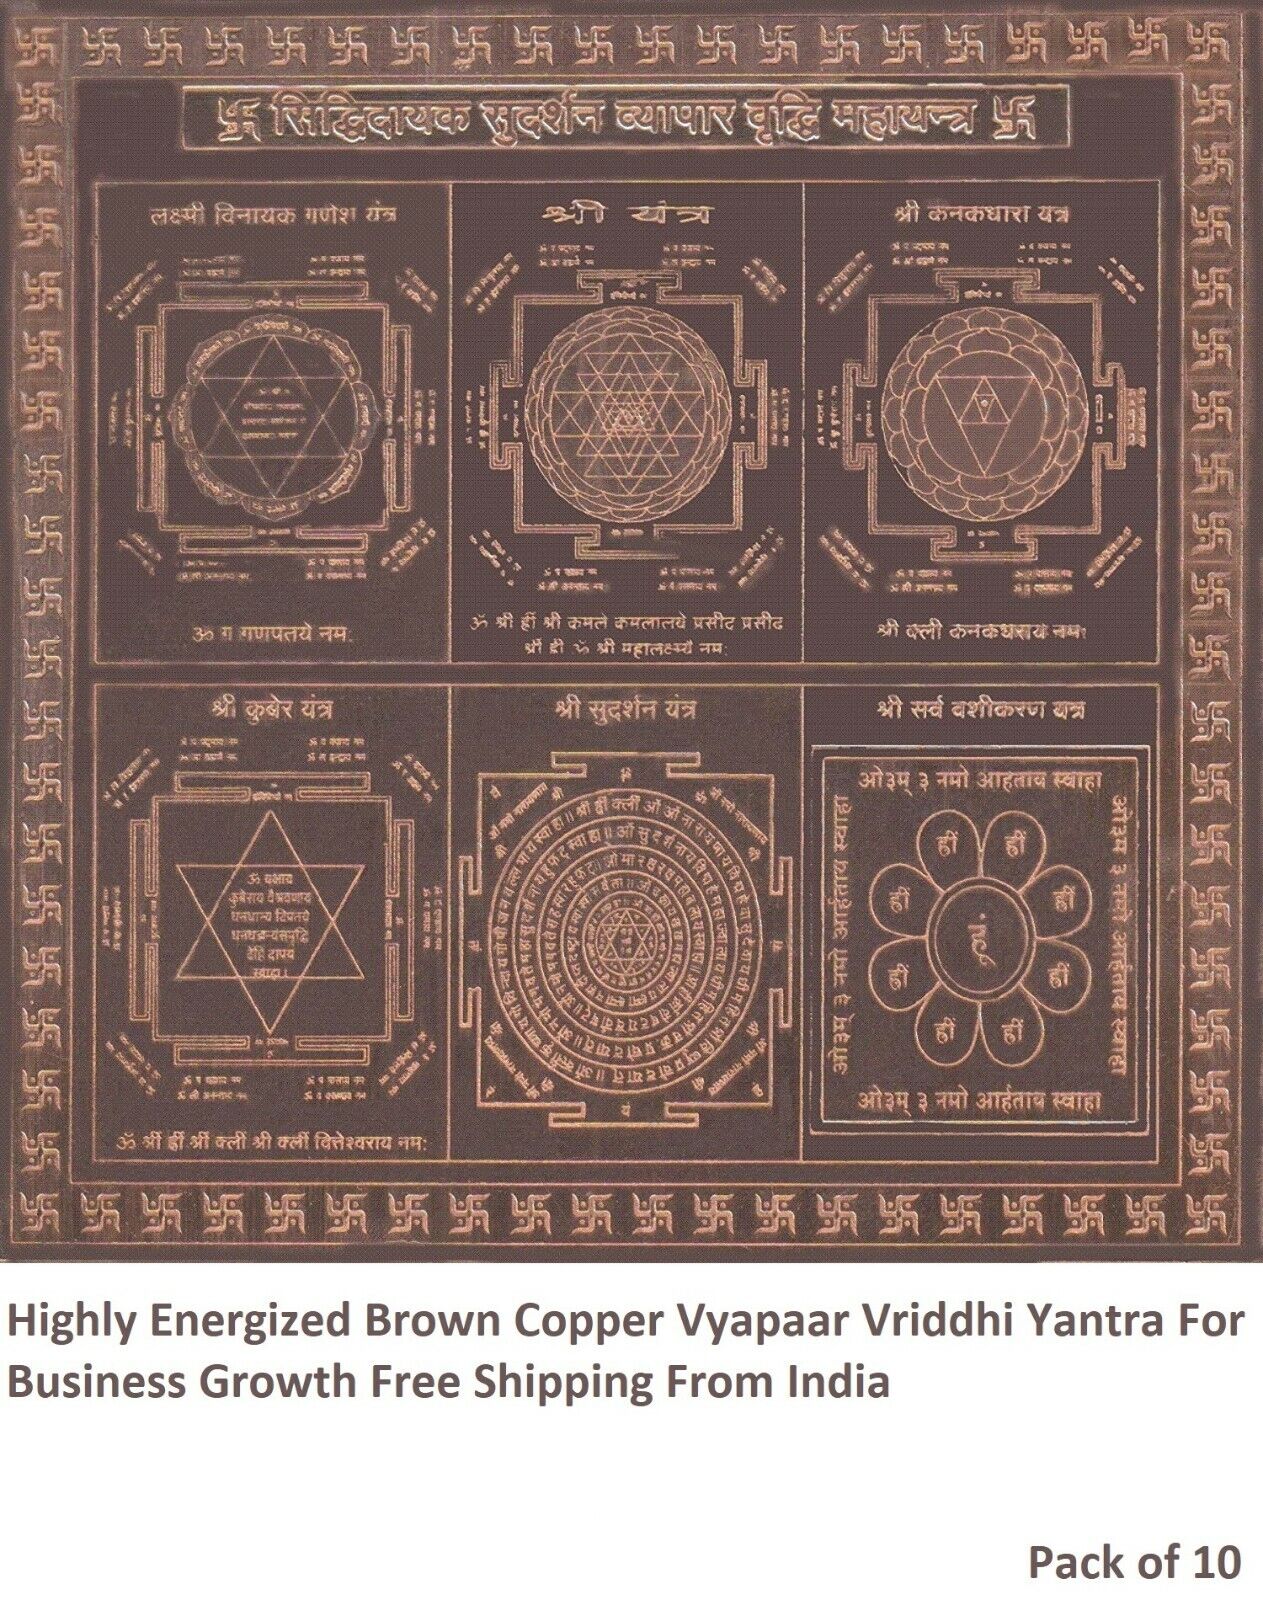 10 x Highly Energized Brown Copper Vyapaar Vriddhi Yantra For Business Growth